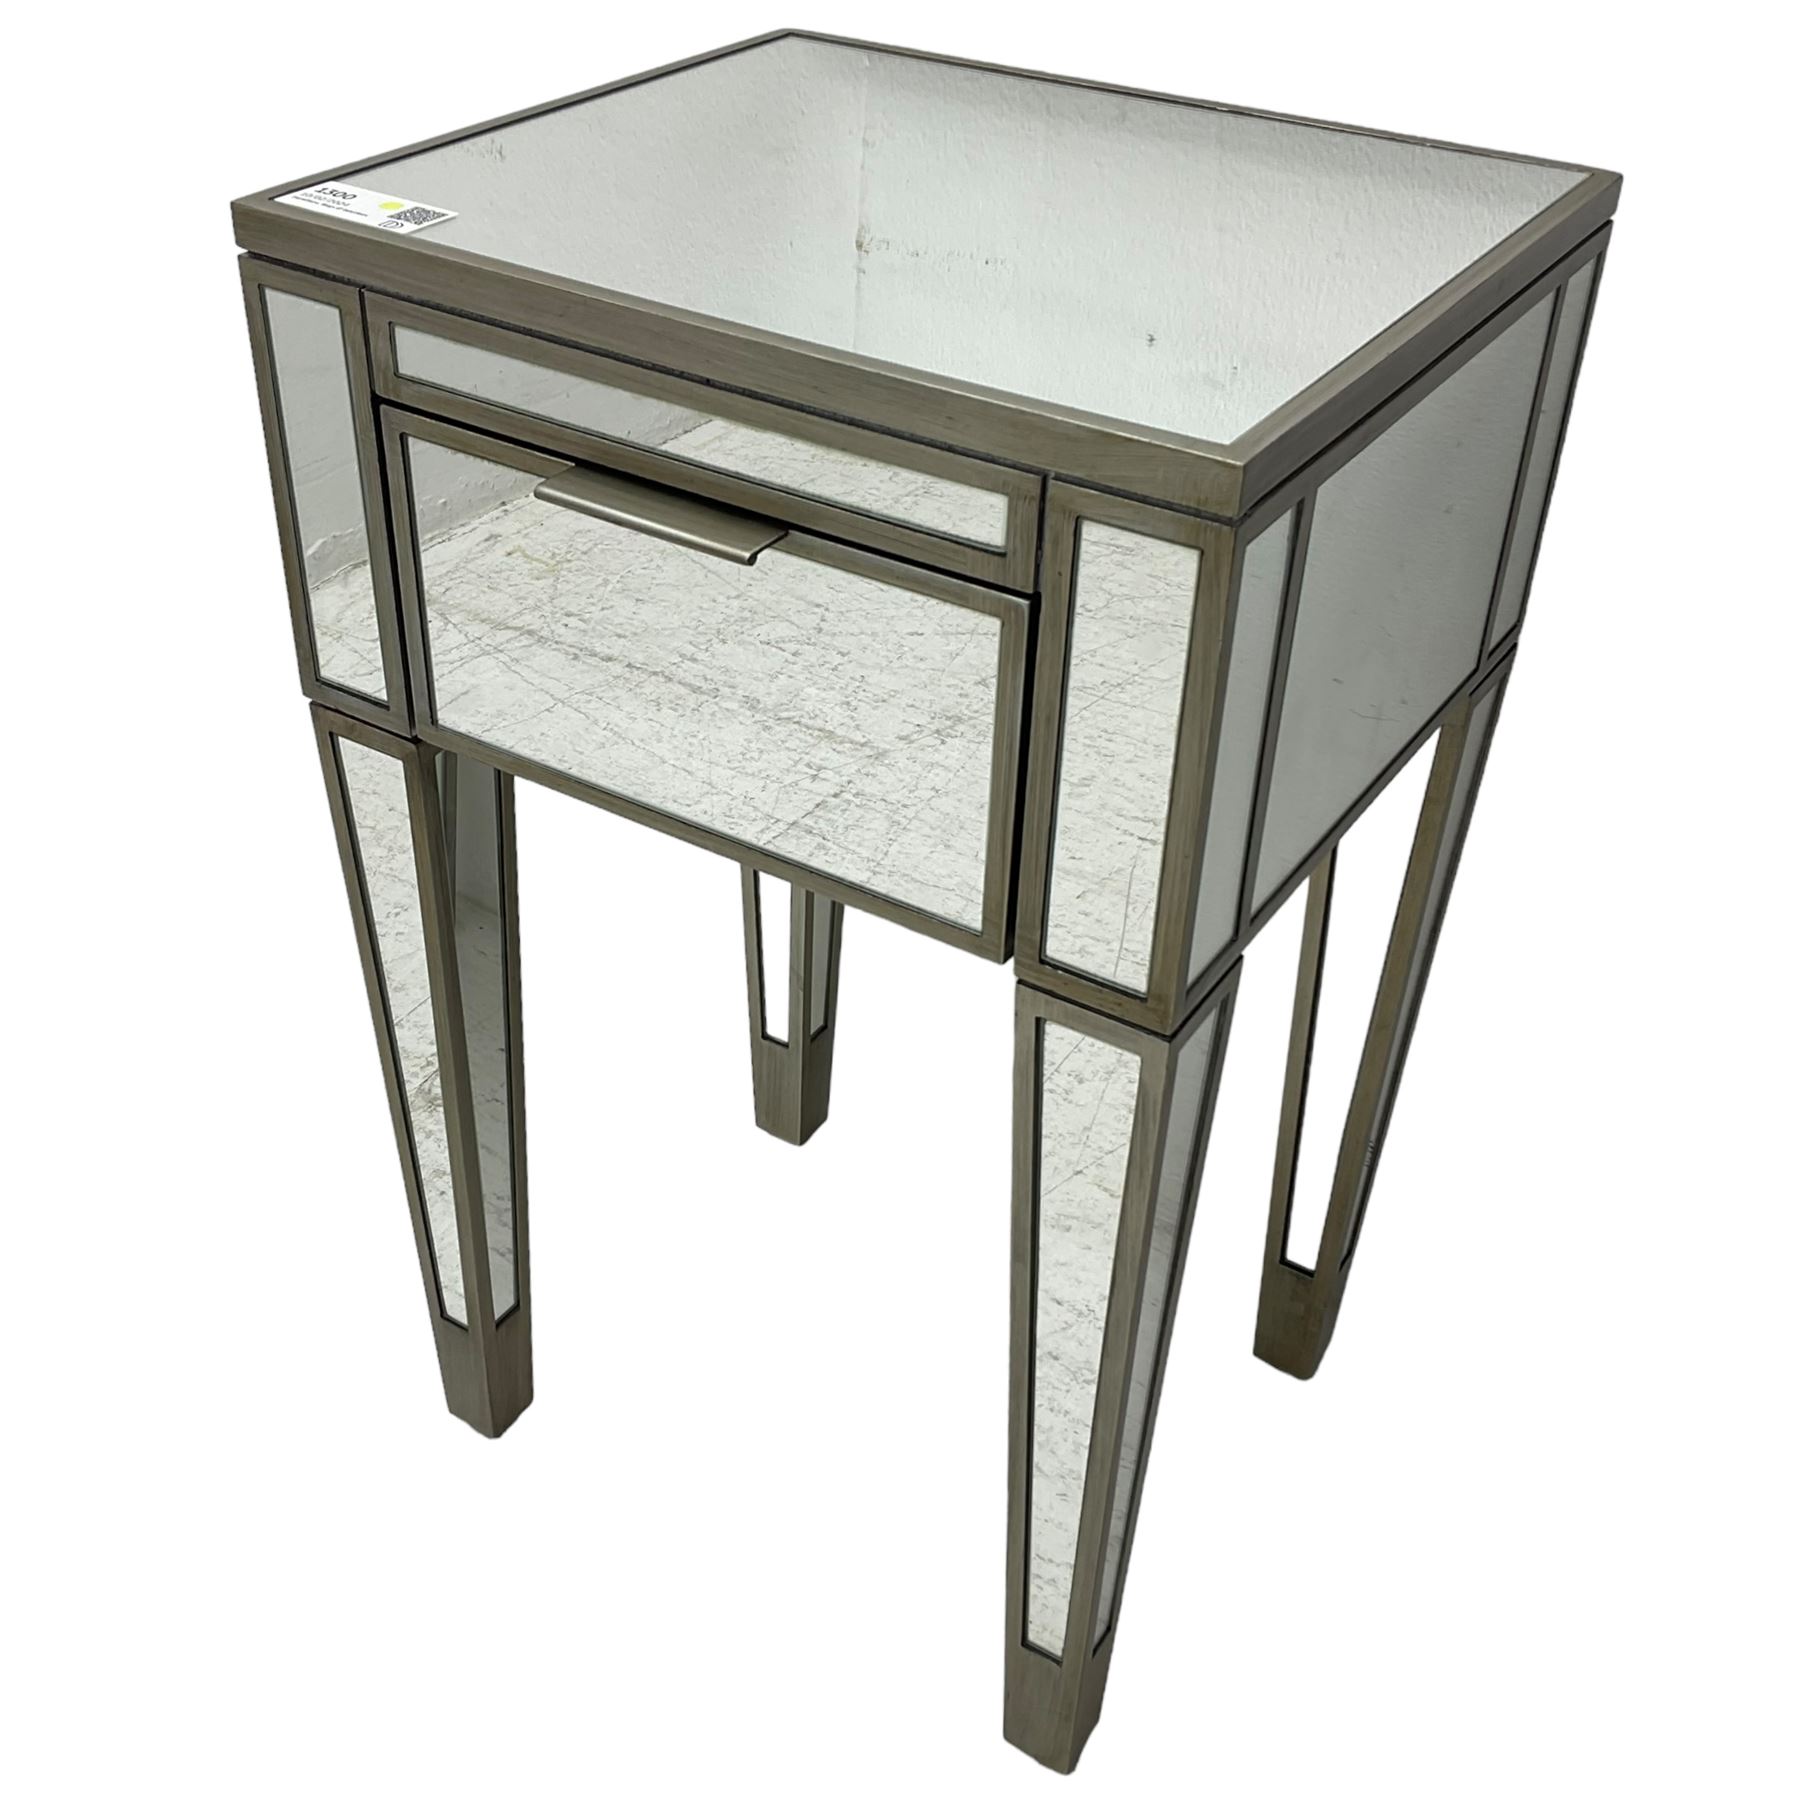 Contemporary mirrored and metal lamp table